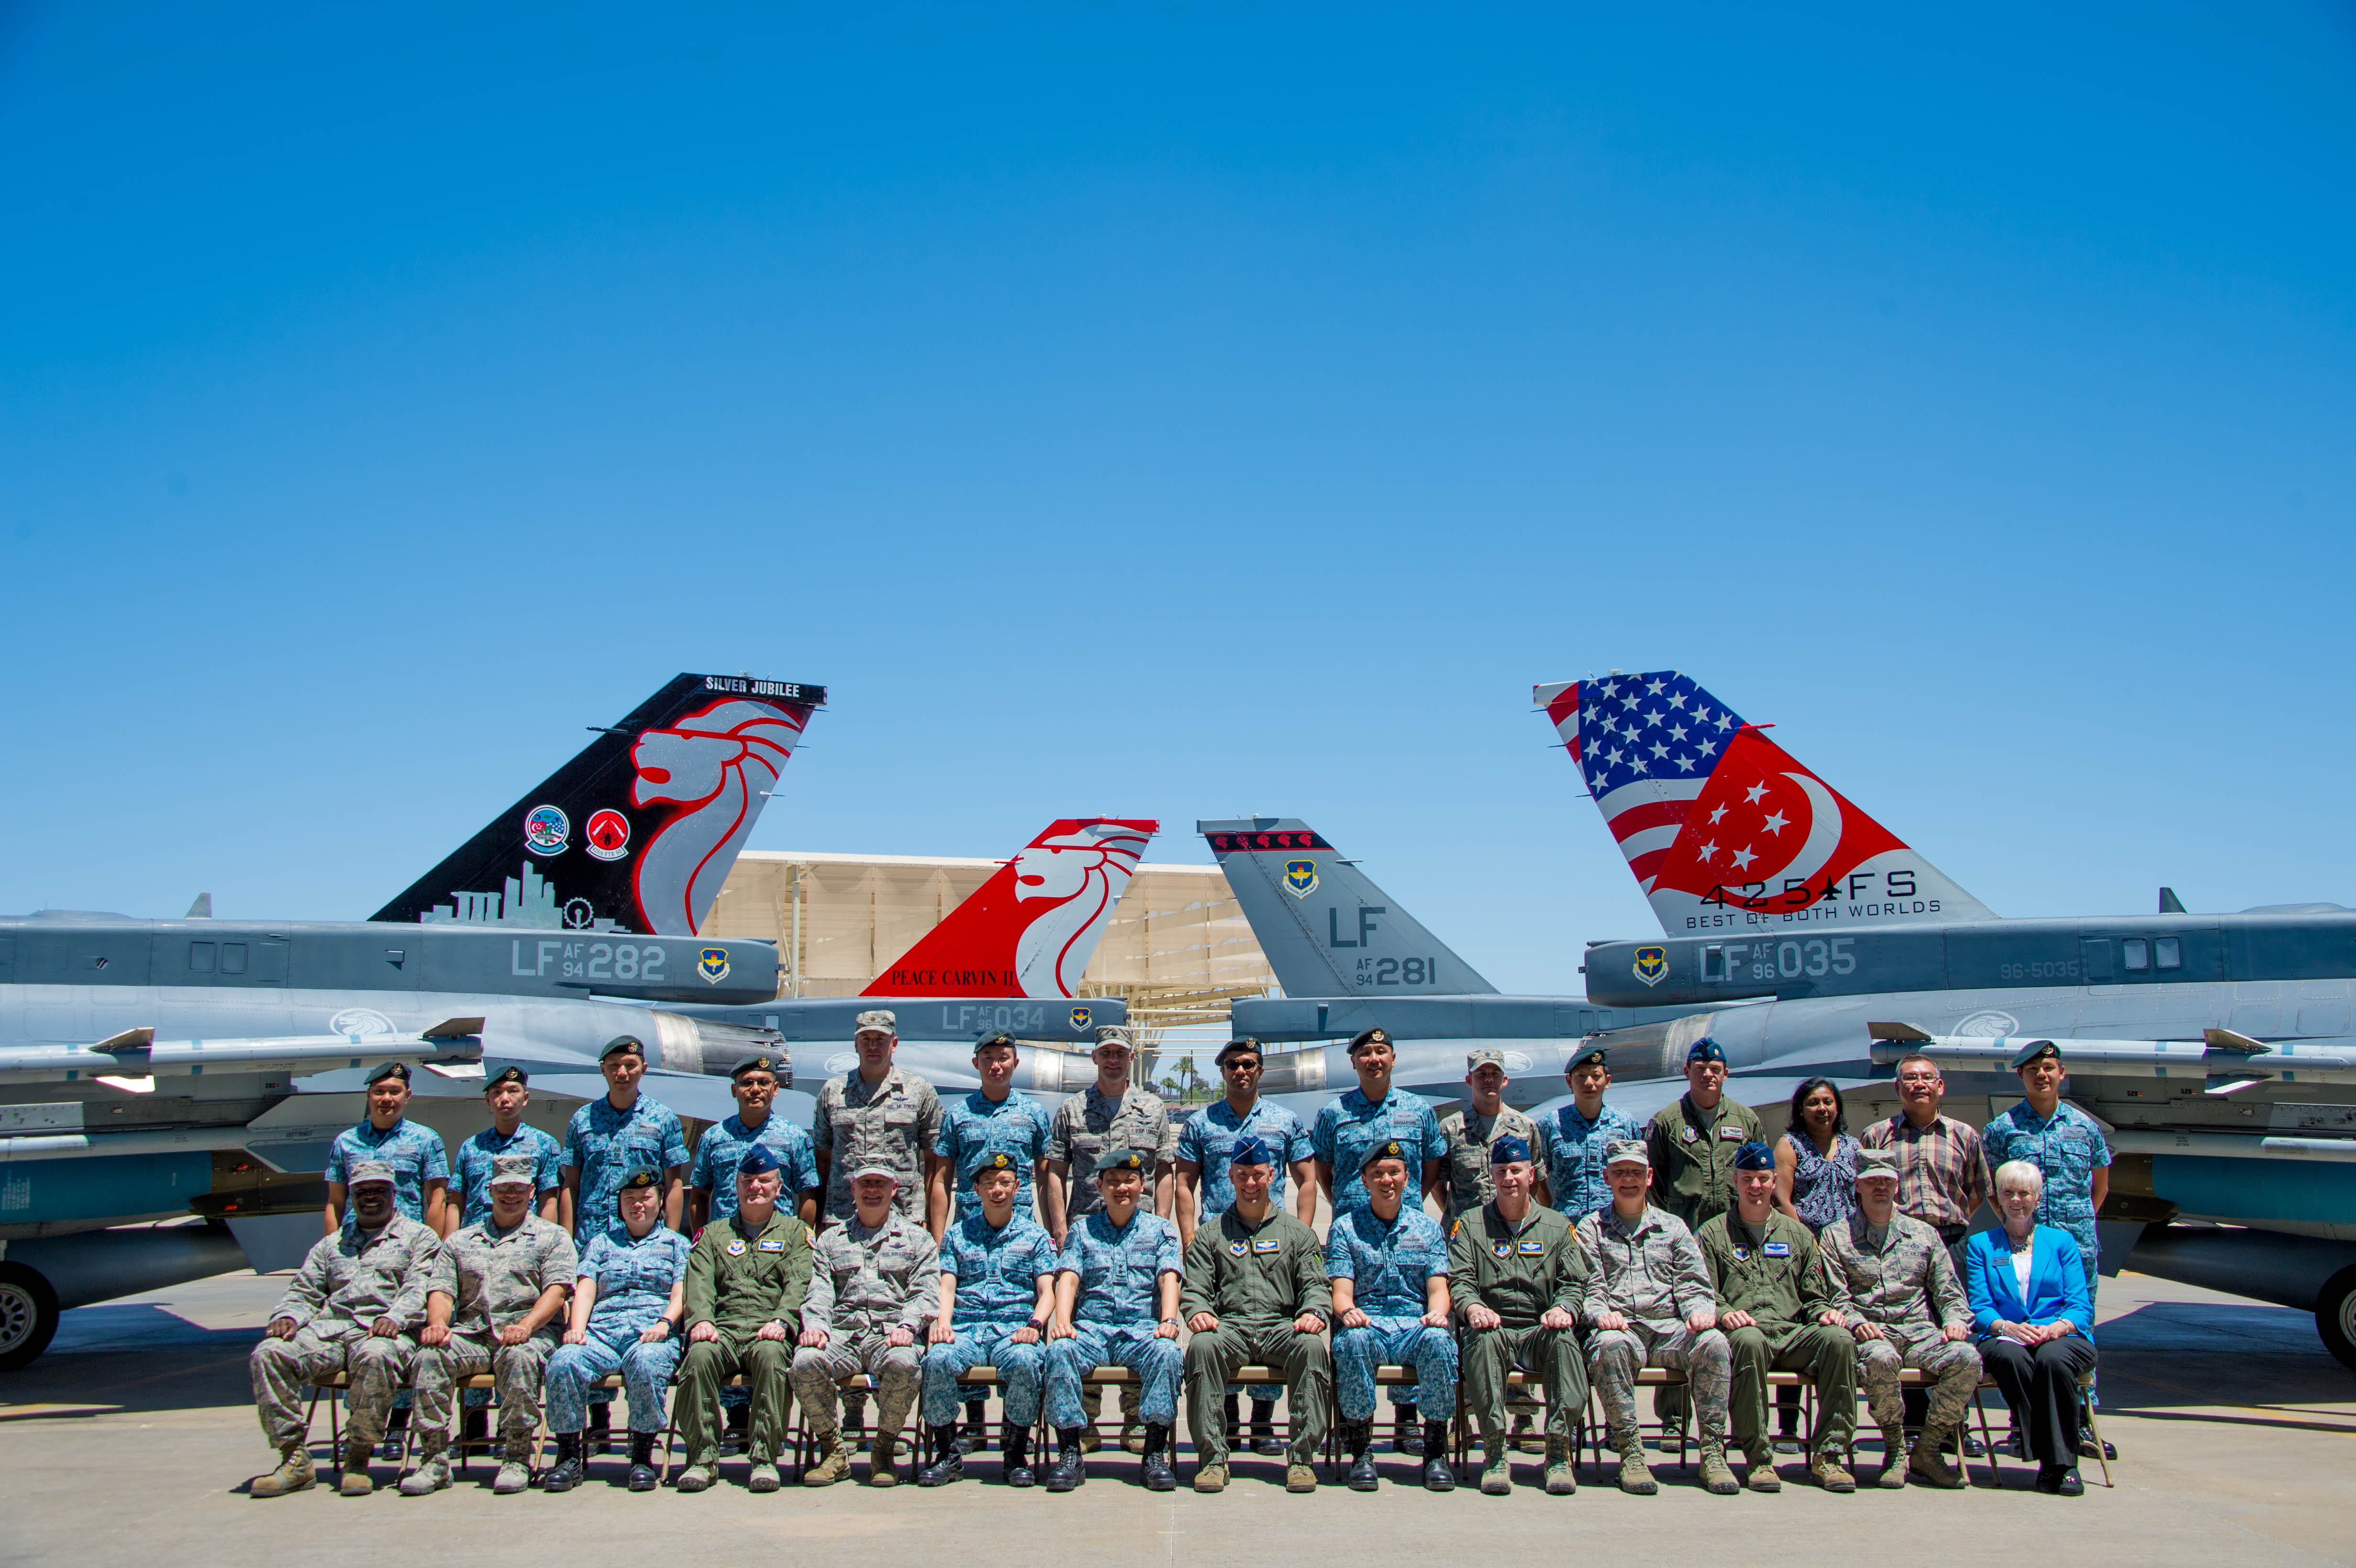 425th Fighter Squadron celebrates 25 years at Luke > Luke Air Force